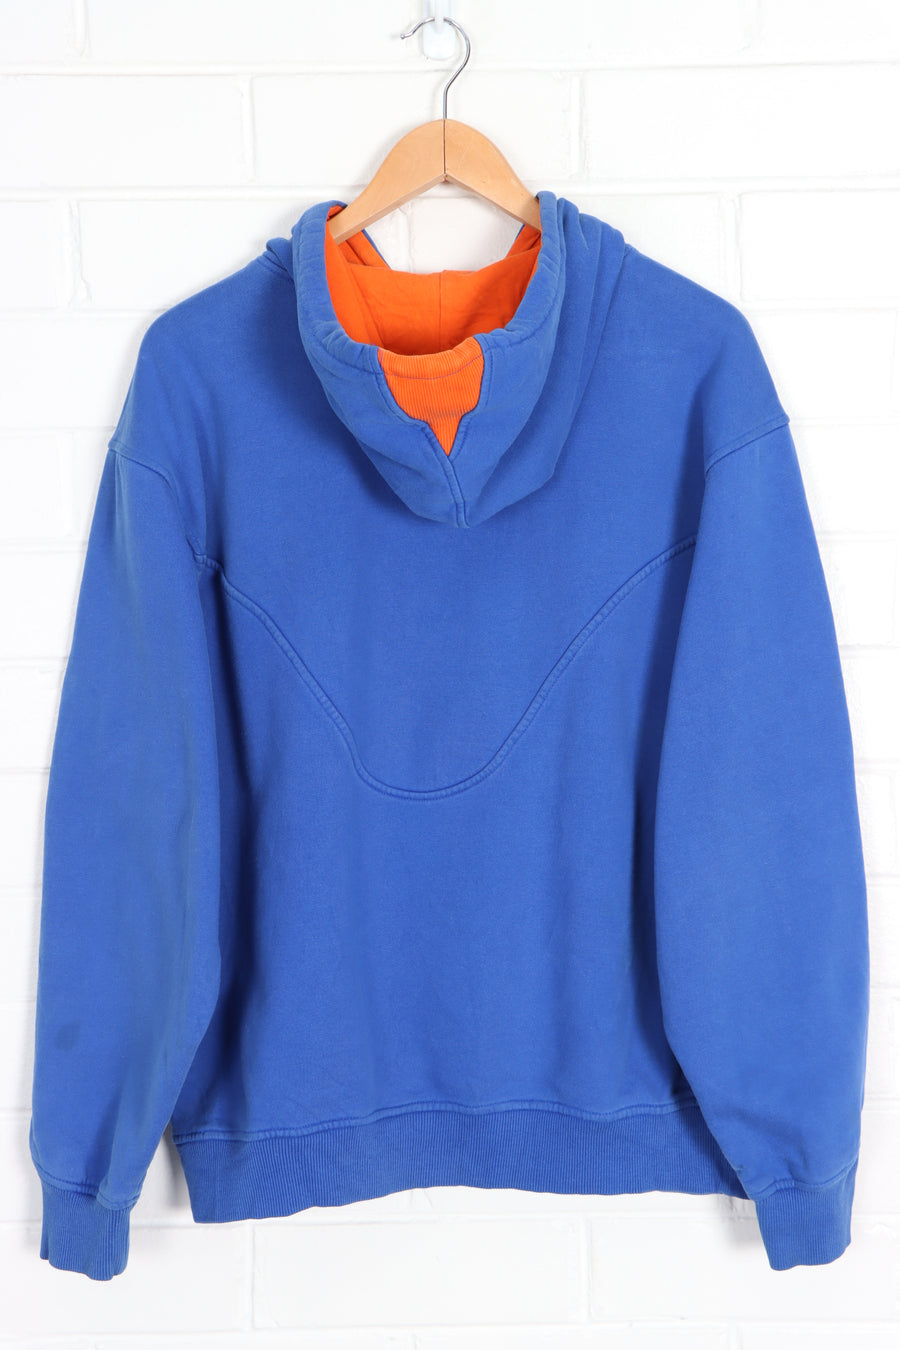 Boise State NIKE Centre Swoosh Textured Embroidery Sweatshirt (M)